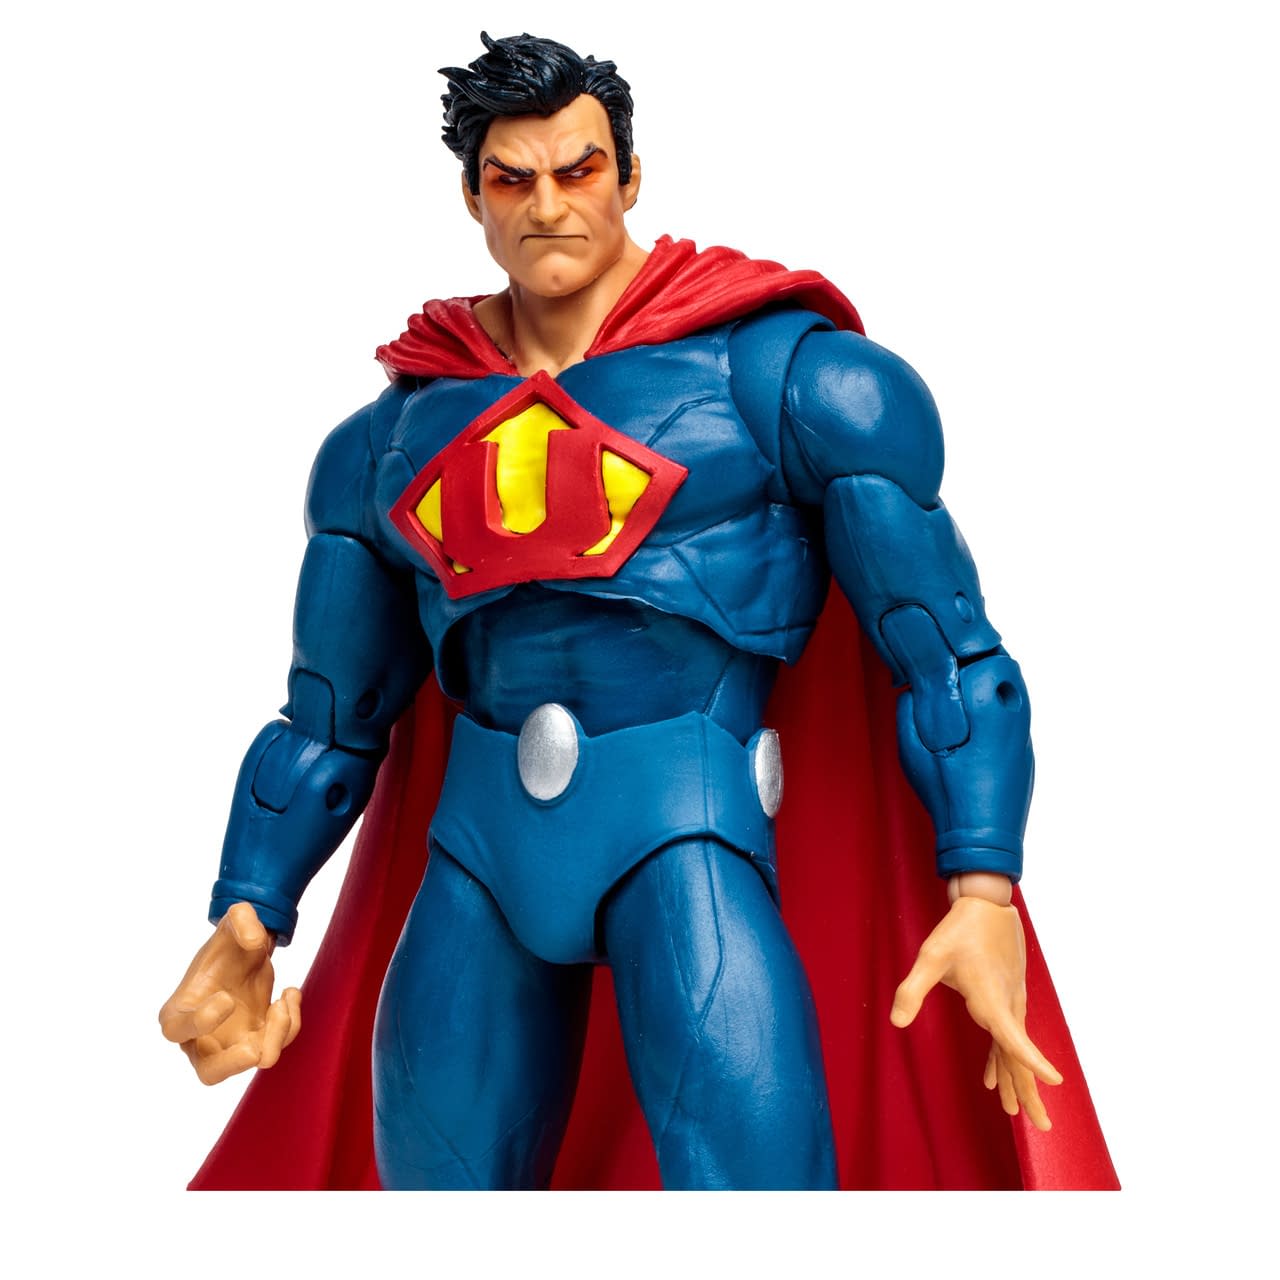 It is Superman vs Superman of Earth-3 with New McFarlane Exclusive